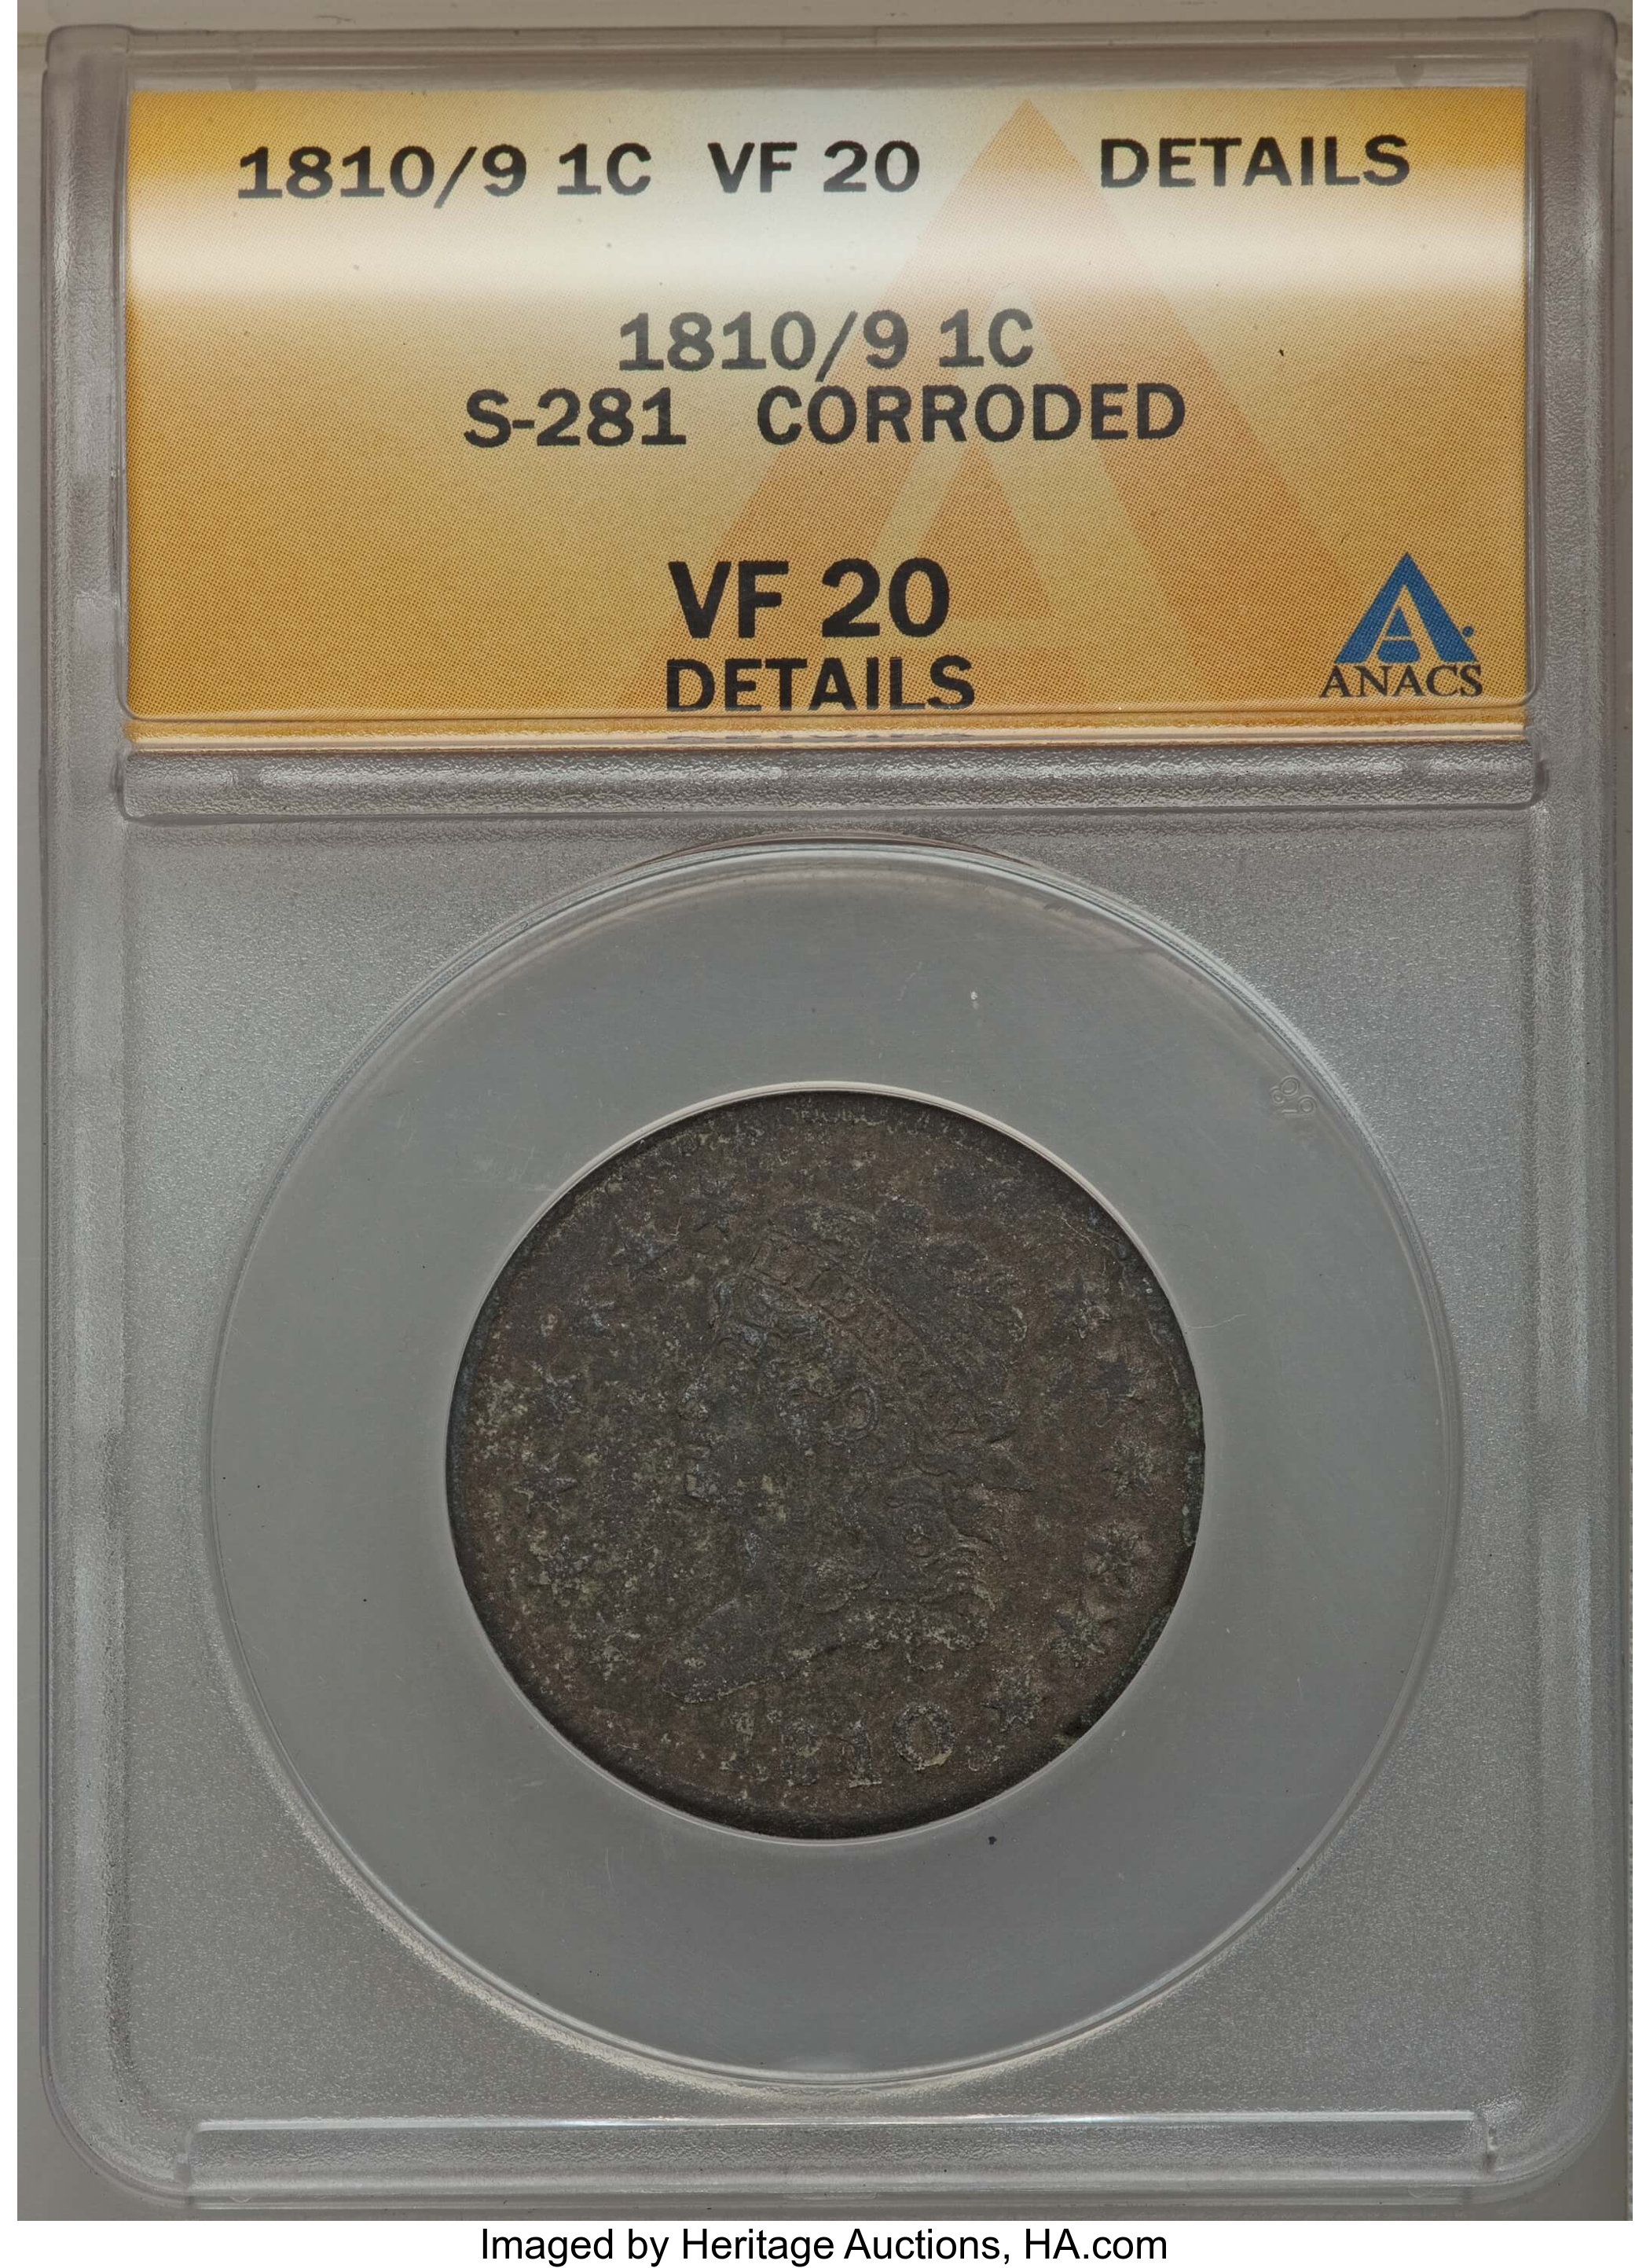 1810 09 1c S 281 B 1 R 1 Corroded Anacs Vf Details Lot Heritage Auctions